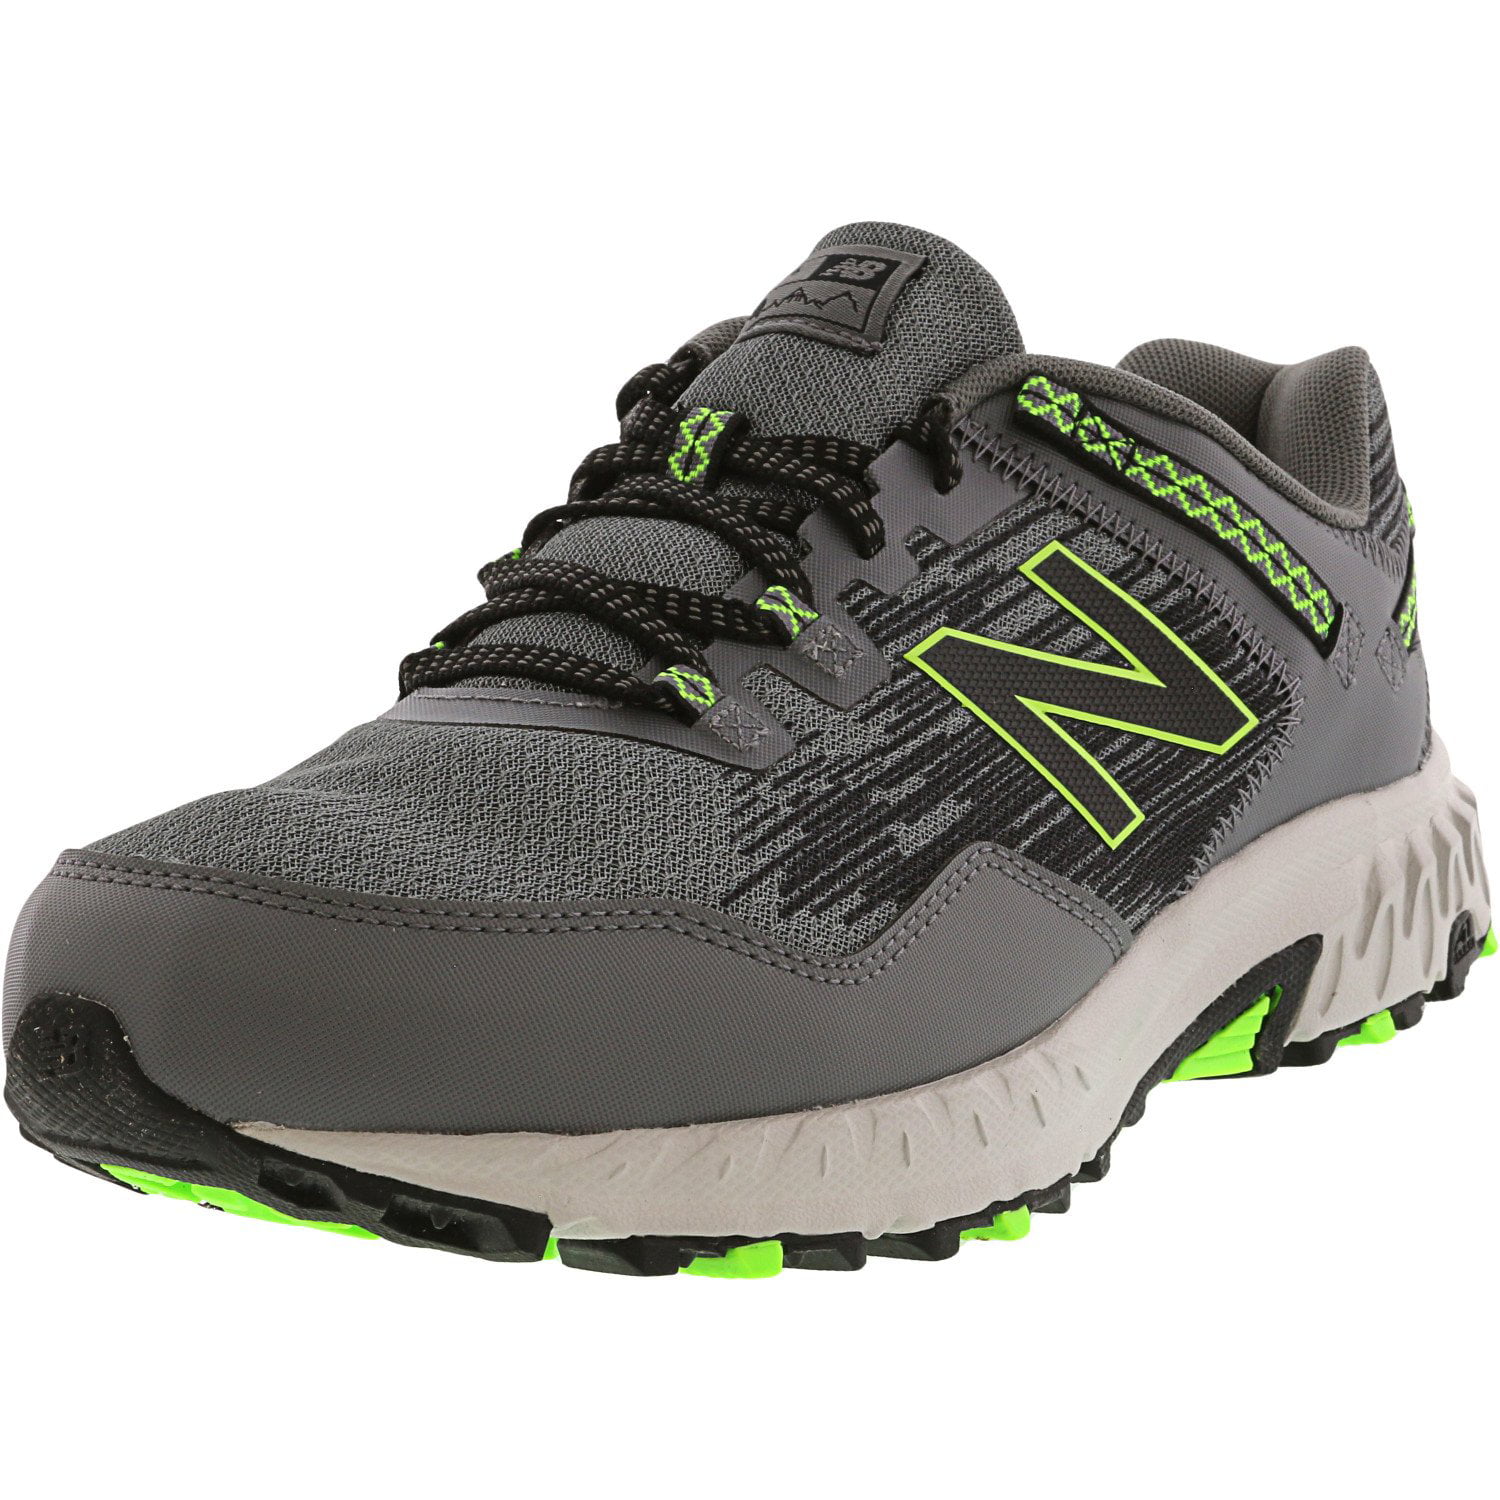 New Balance Men's Mt410 Lc6 Ankle-High 